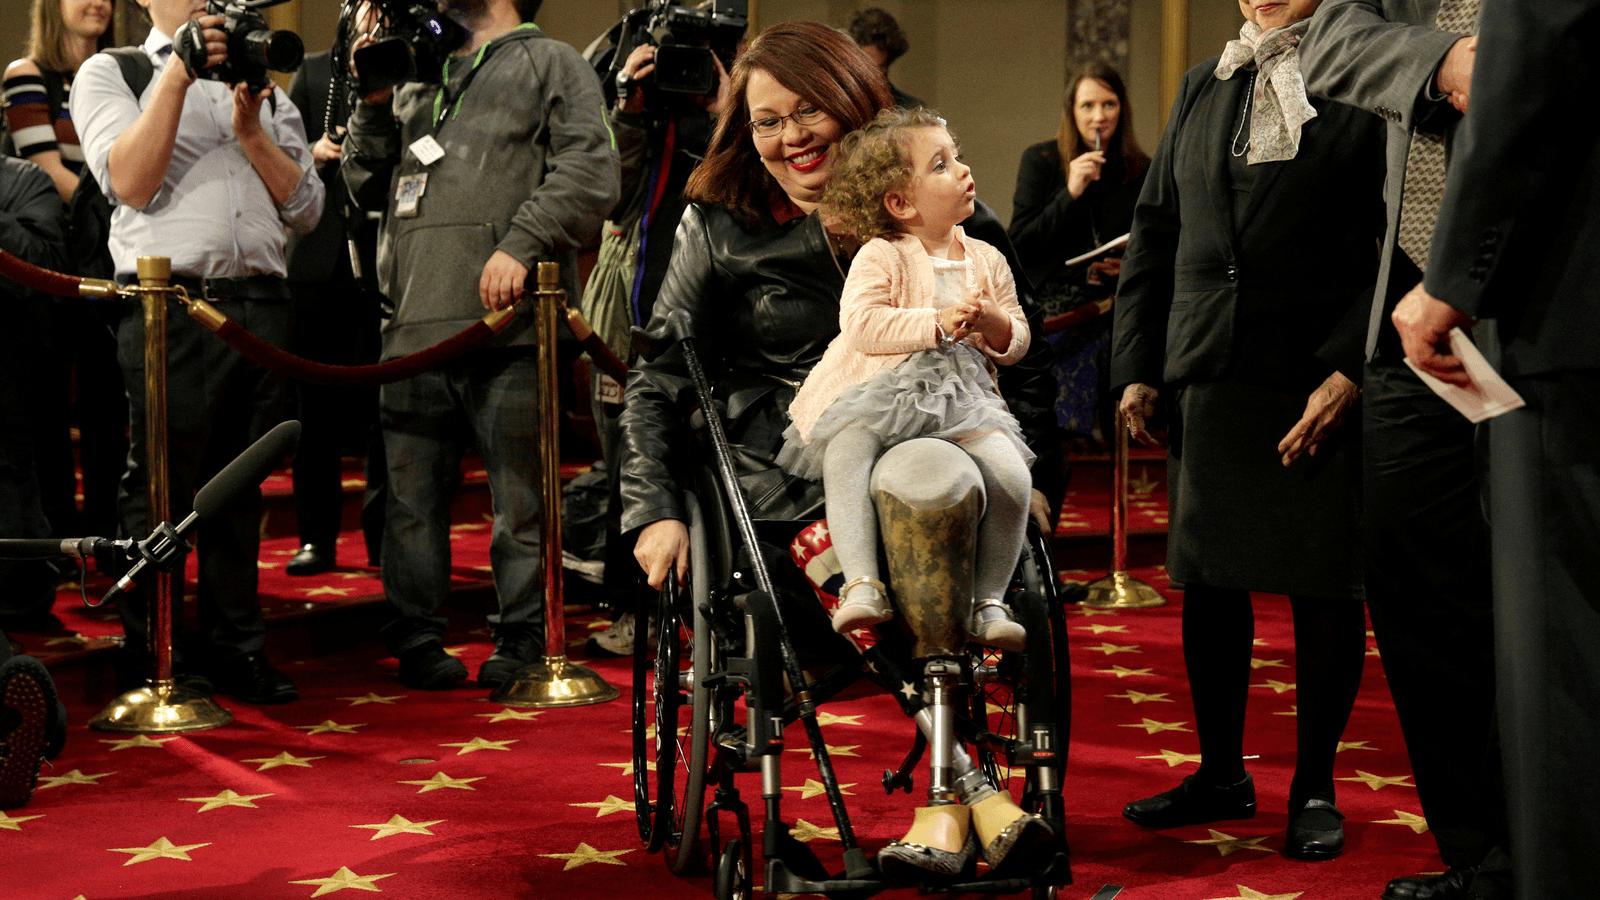 Senator Tammy Duckworth carries her daughter Abigail during a mock swearing-in with US Vice President Joe Biden during the opening day of the 115th Congress on Capitol Hill in Washington, DC, Jan. 3, 2017.